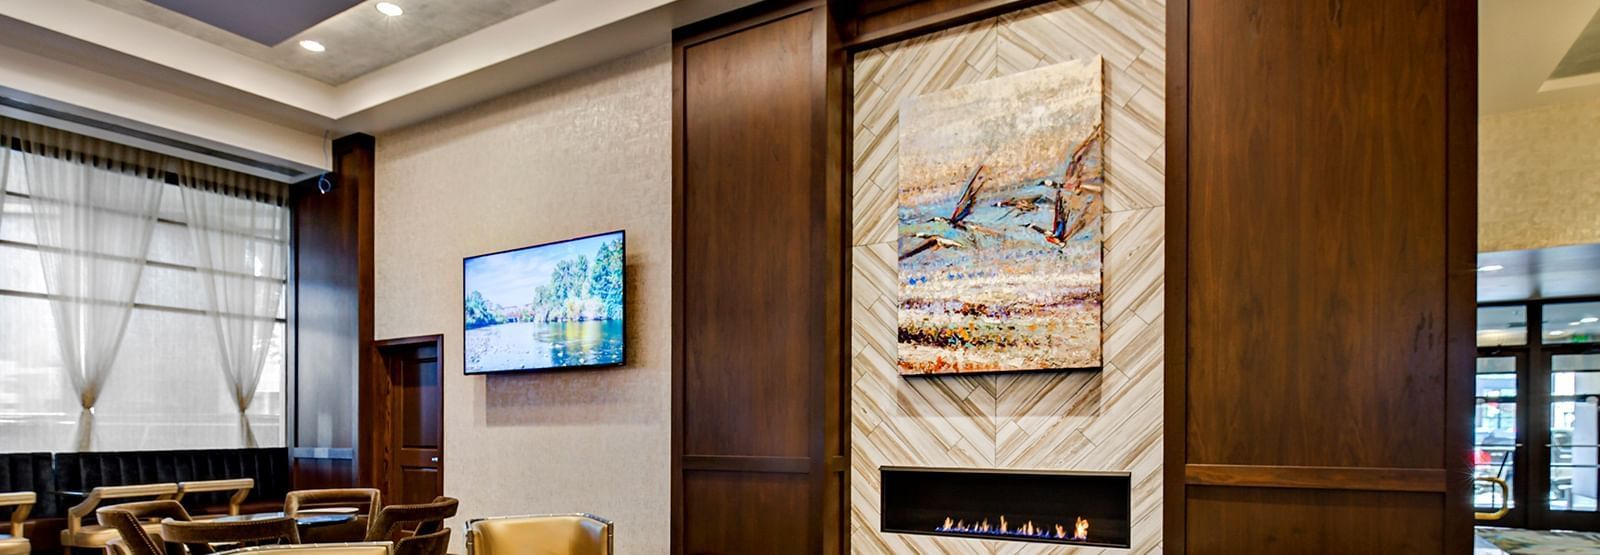 A wall-mounted TV in a lobby area at The Grove Hotel